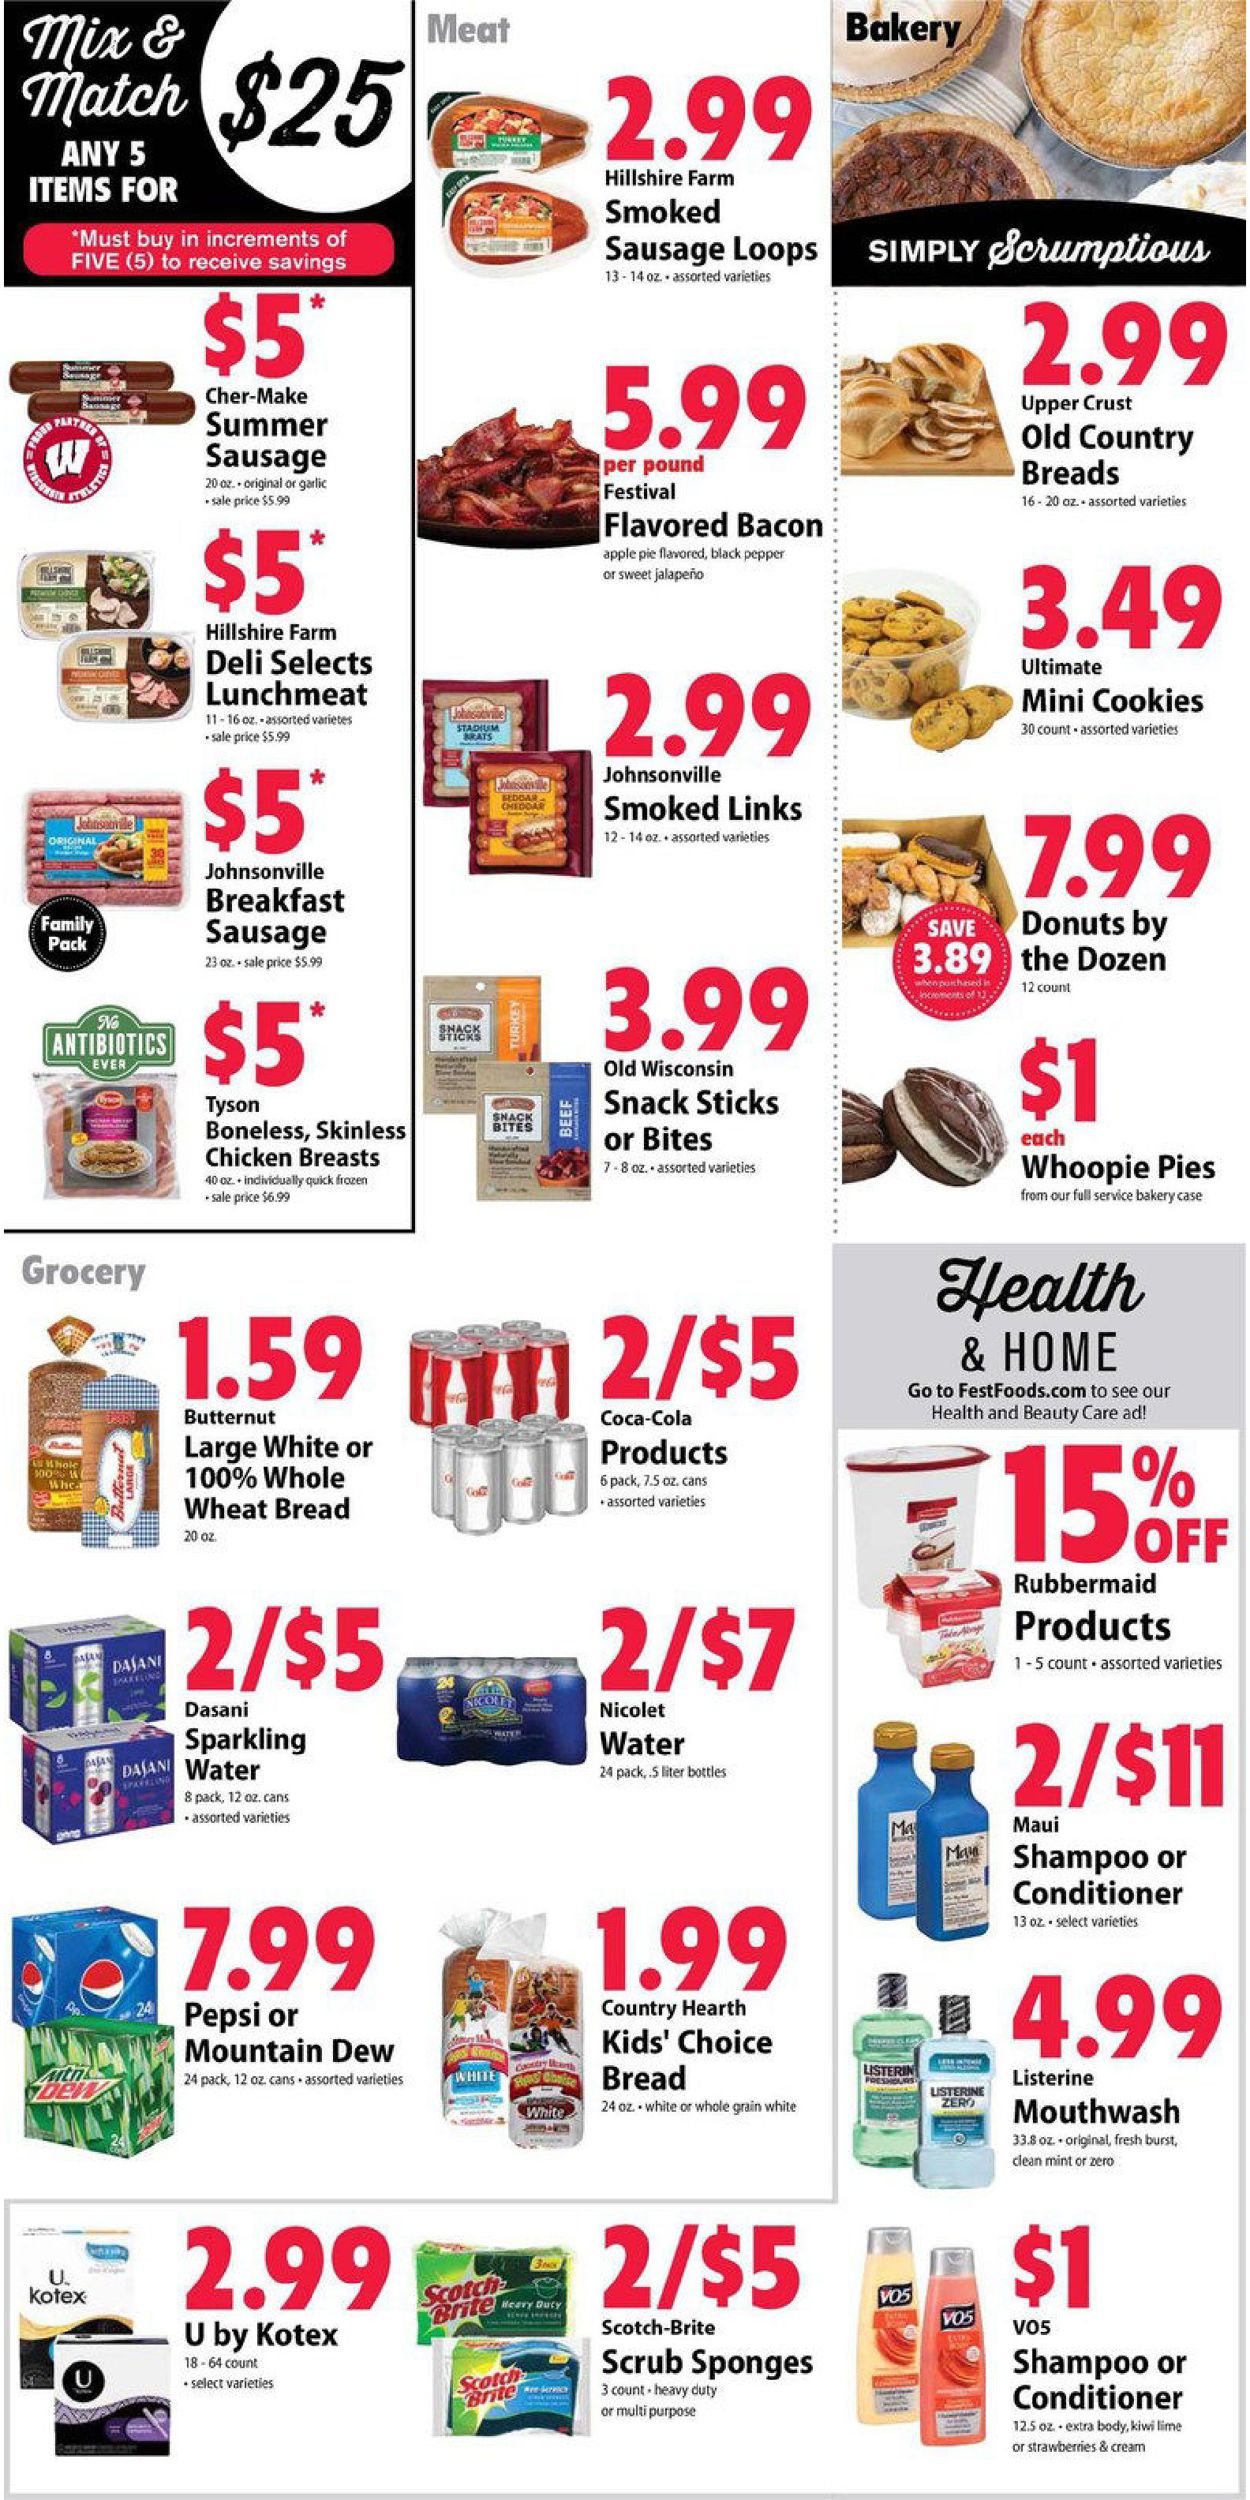 Festival Foods Black Friday Ad 2019 Weekly Ad Circular - valid 11/27-12/03/2019 (Page 5)